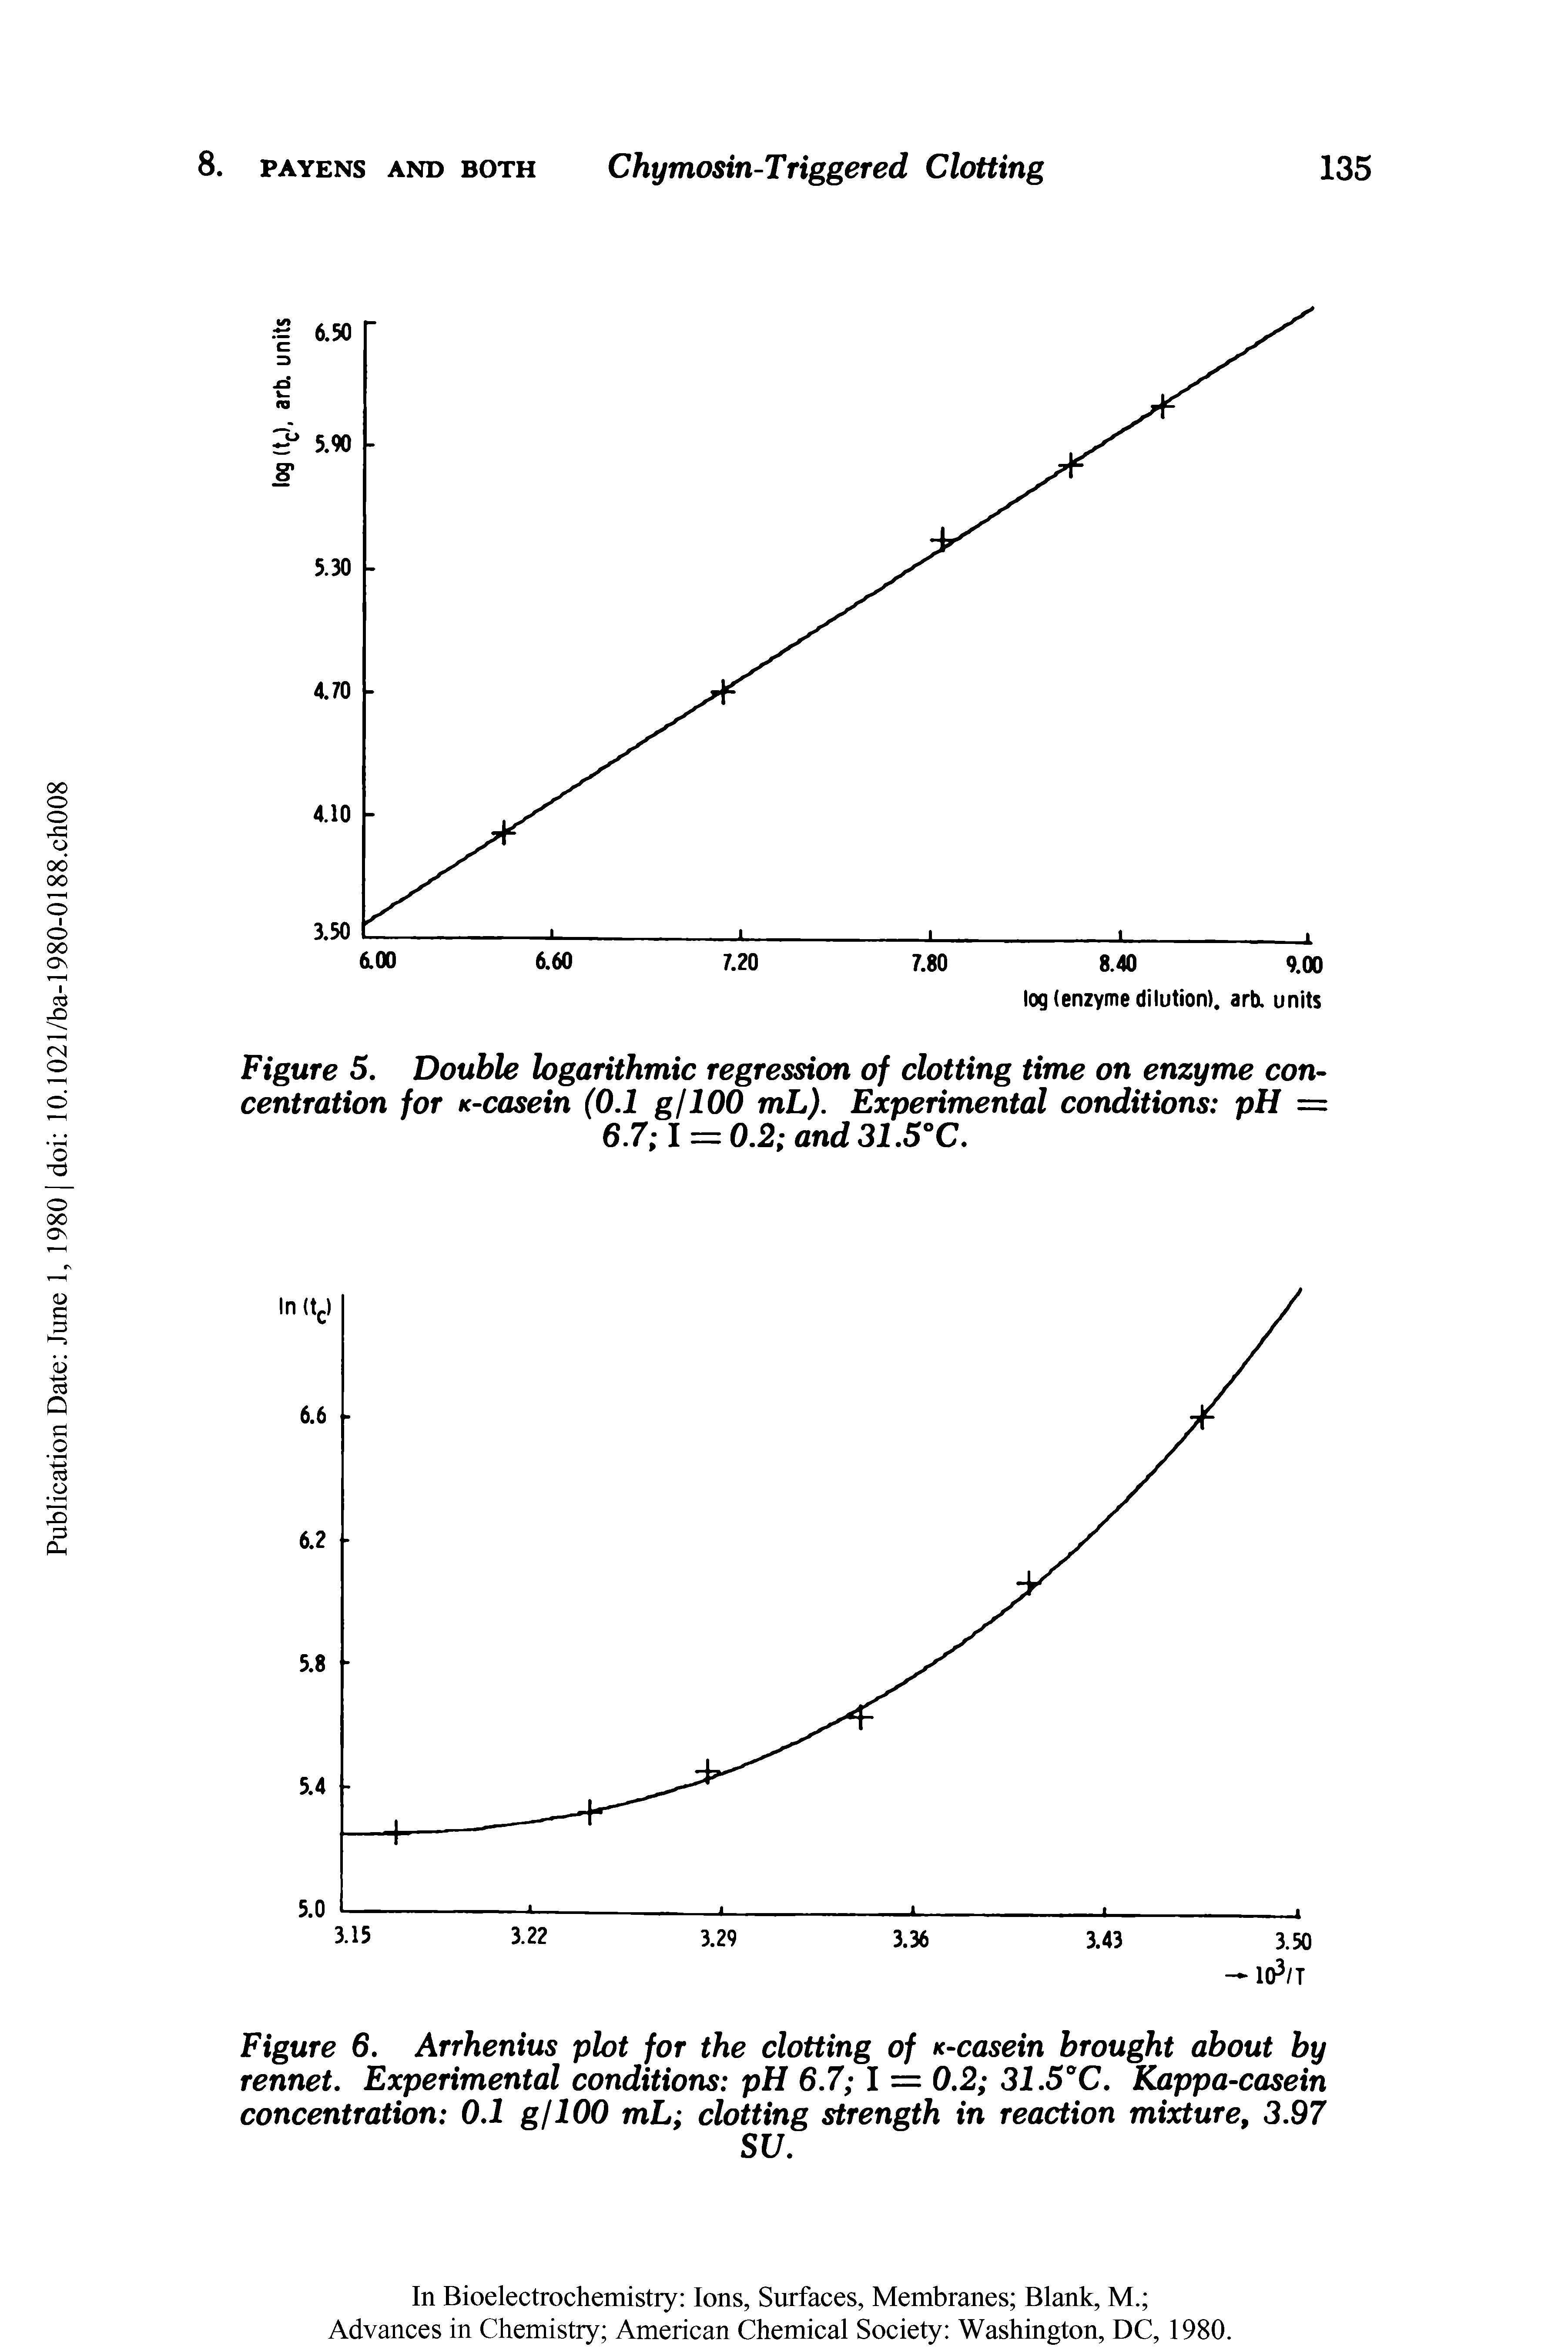 Figure 6. Arrhenius plot for the clotting of K-casein brought about by rennet. Experimental conditions pH 6.7 I = 0.2 31.5°C. Kappa-casein concentration 0.1 g/100 mL clotting strength in reaction mixture, 3.97...